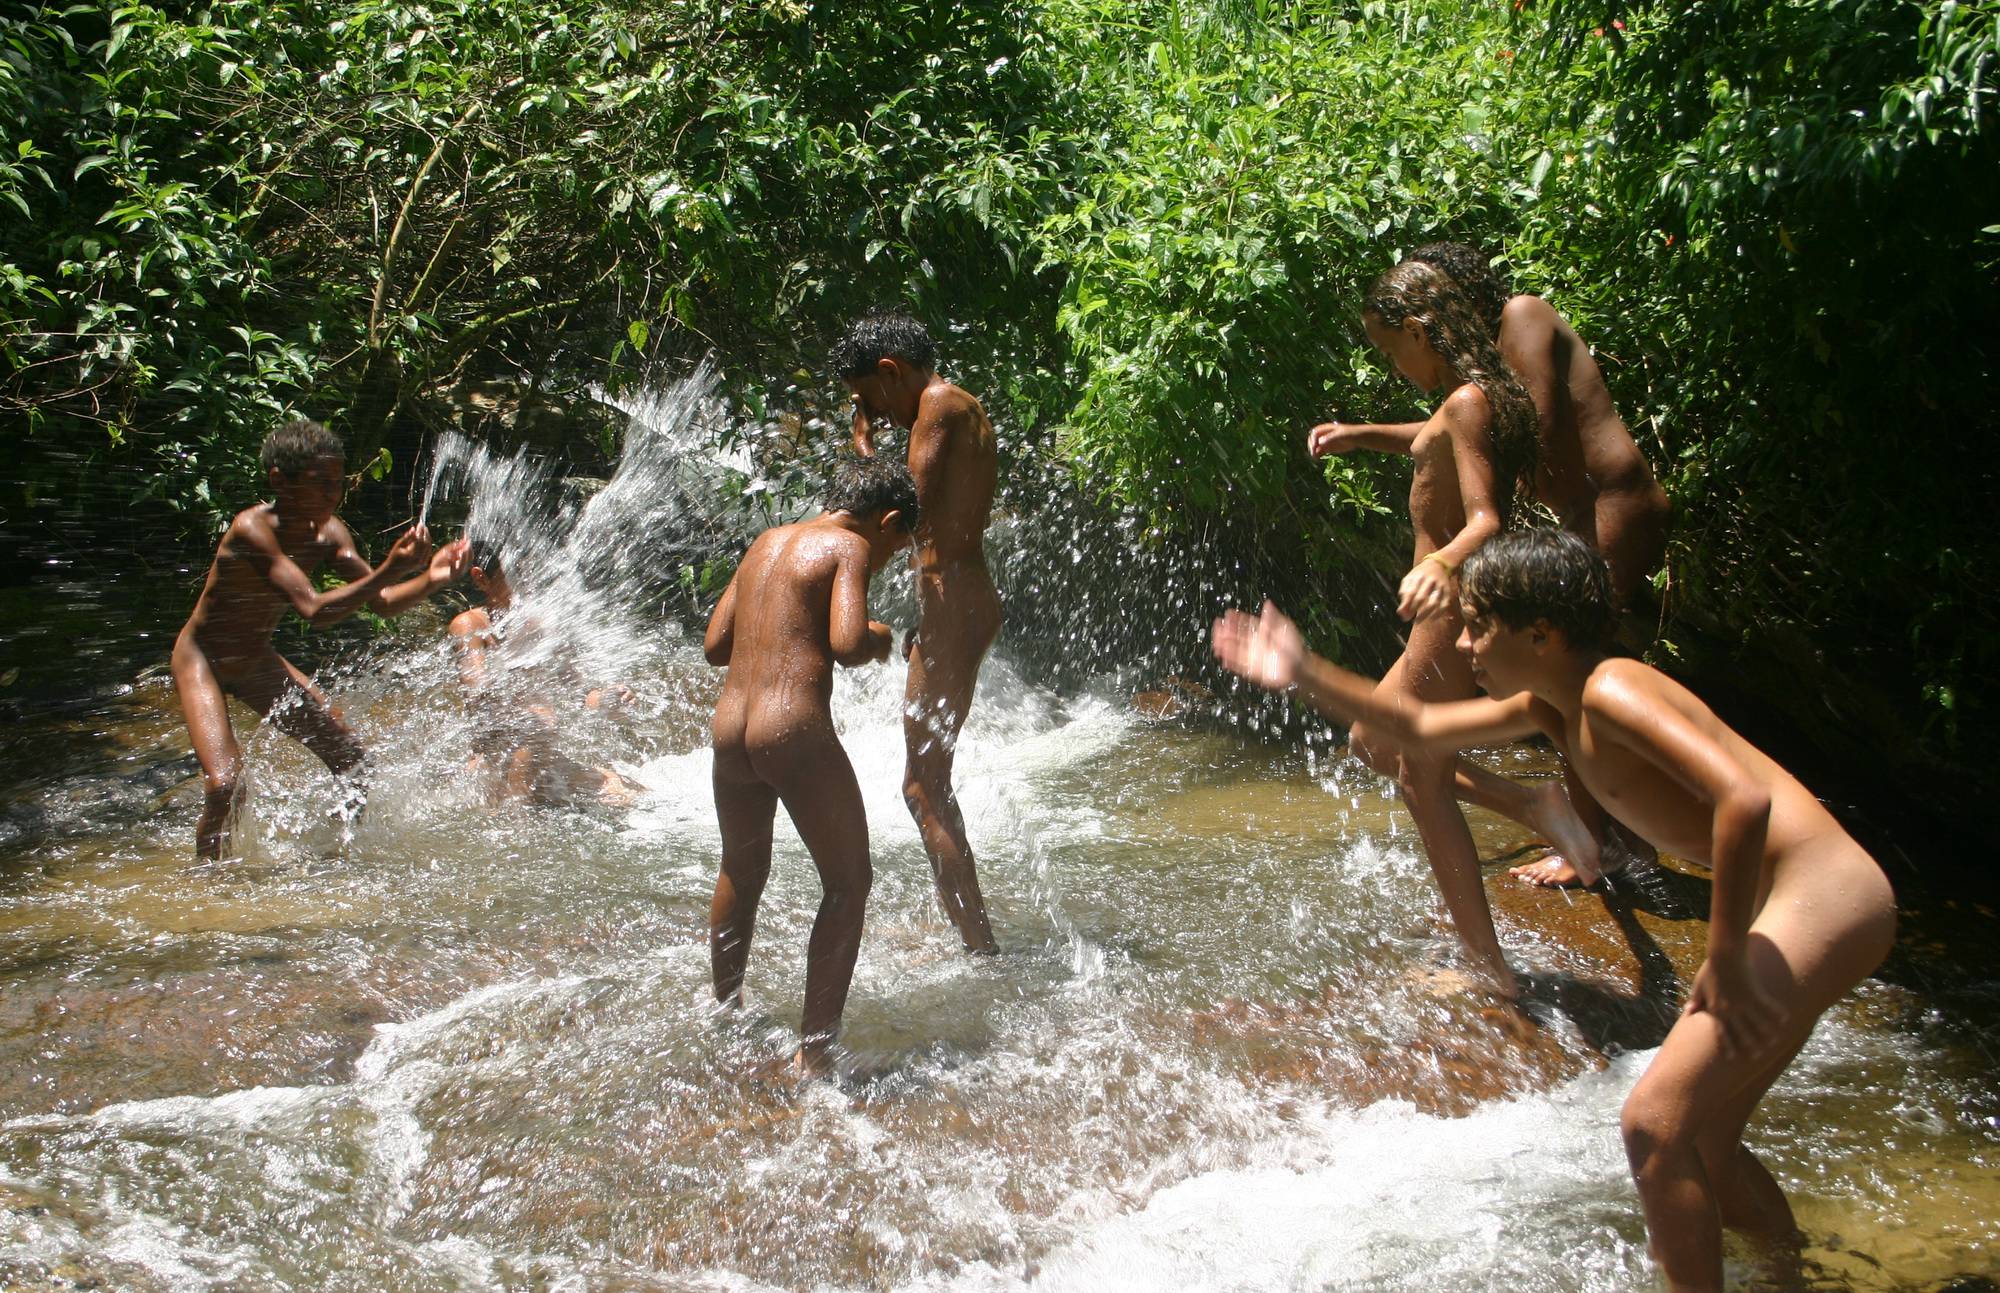 Pure Nudism Photos-Brazilian River Water Fight - 4